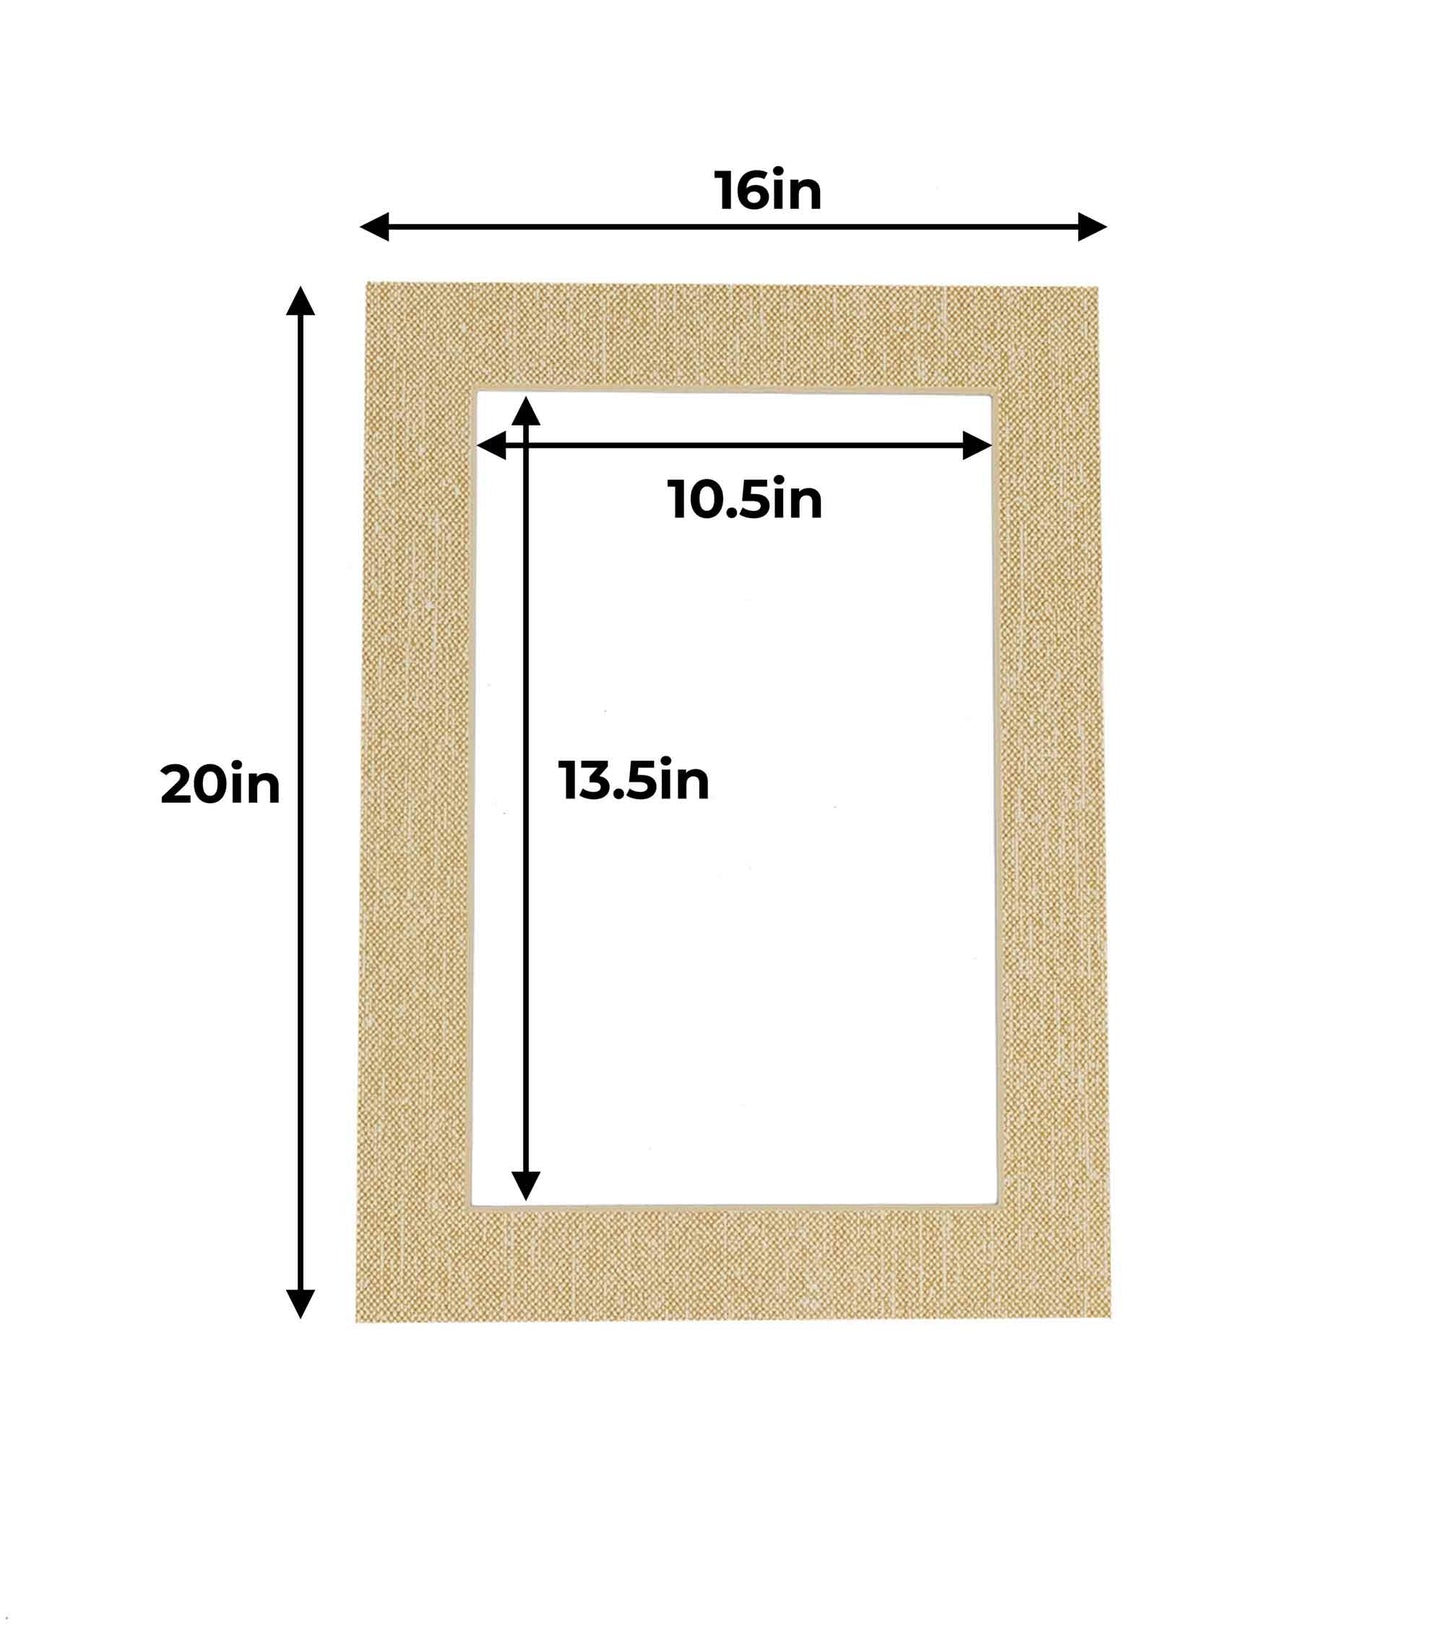 Pack of 25 Fresh Linen Canvas Precut Acid-Free Matboard Set with Clear Bags & Backings